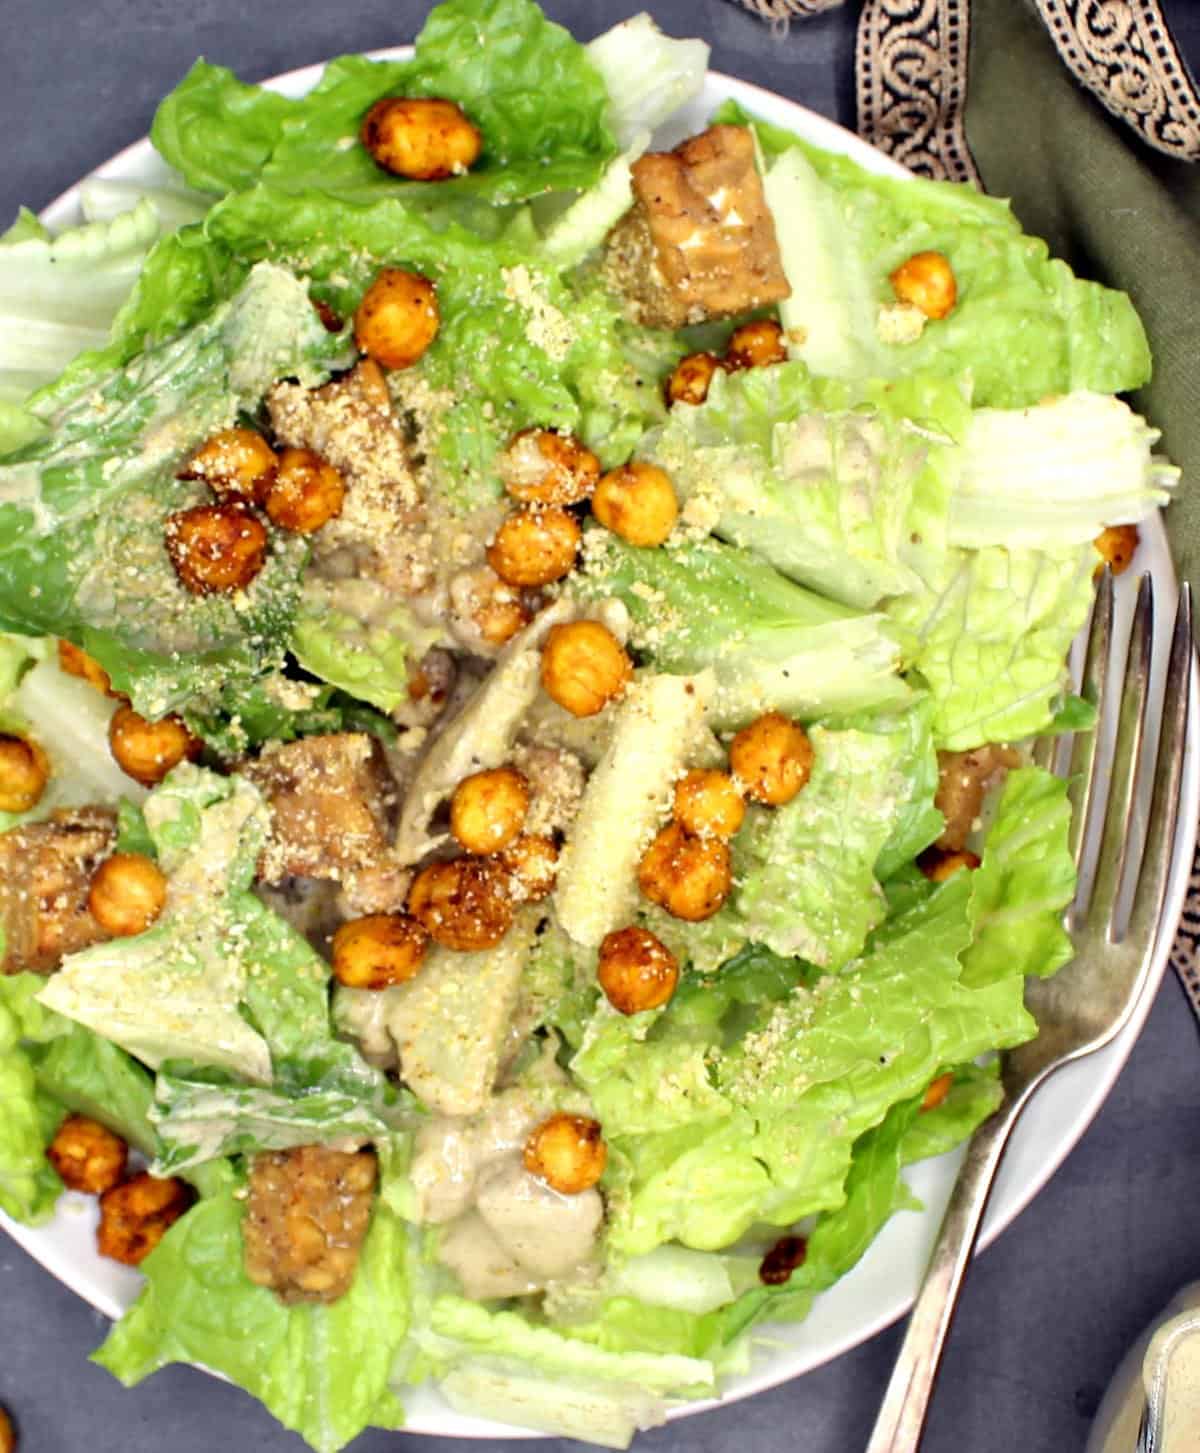 Vegan Caesar Salad with chickpea croutons and tempeh and vegan parmesan cheese.